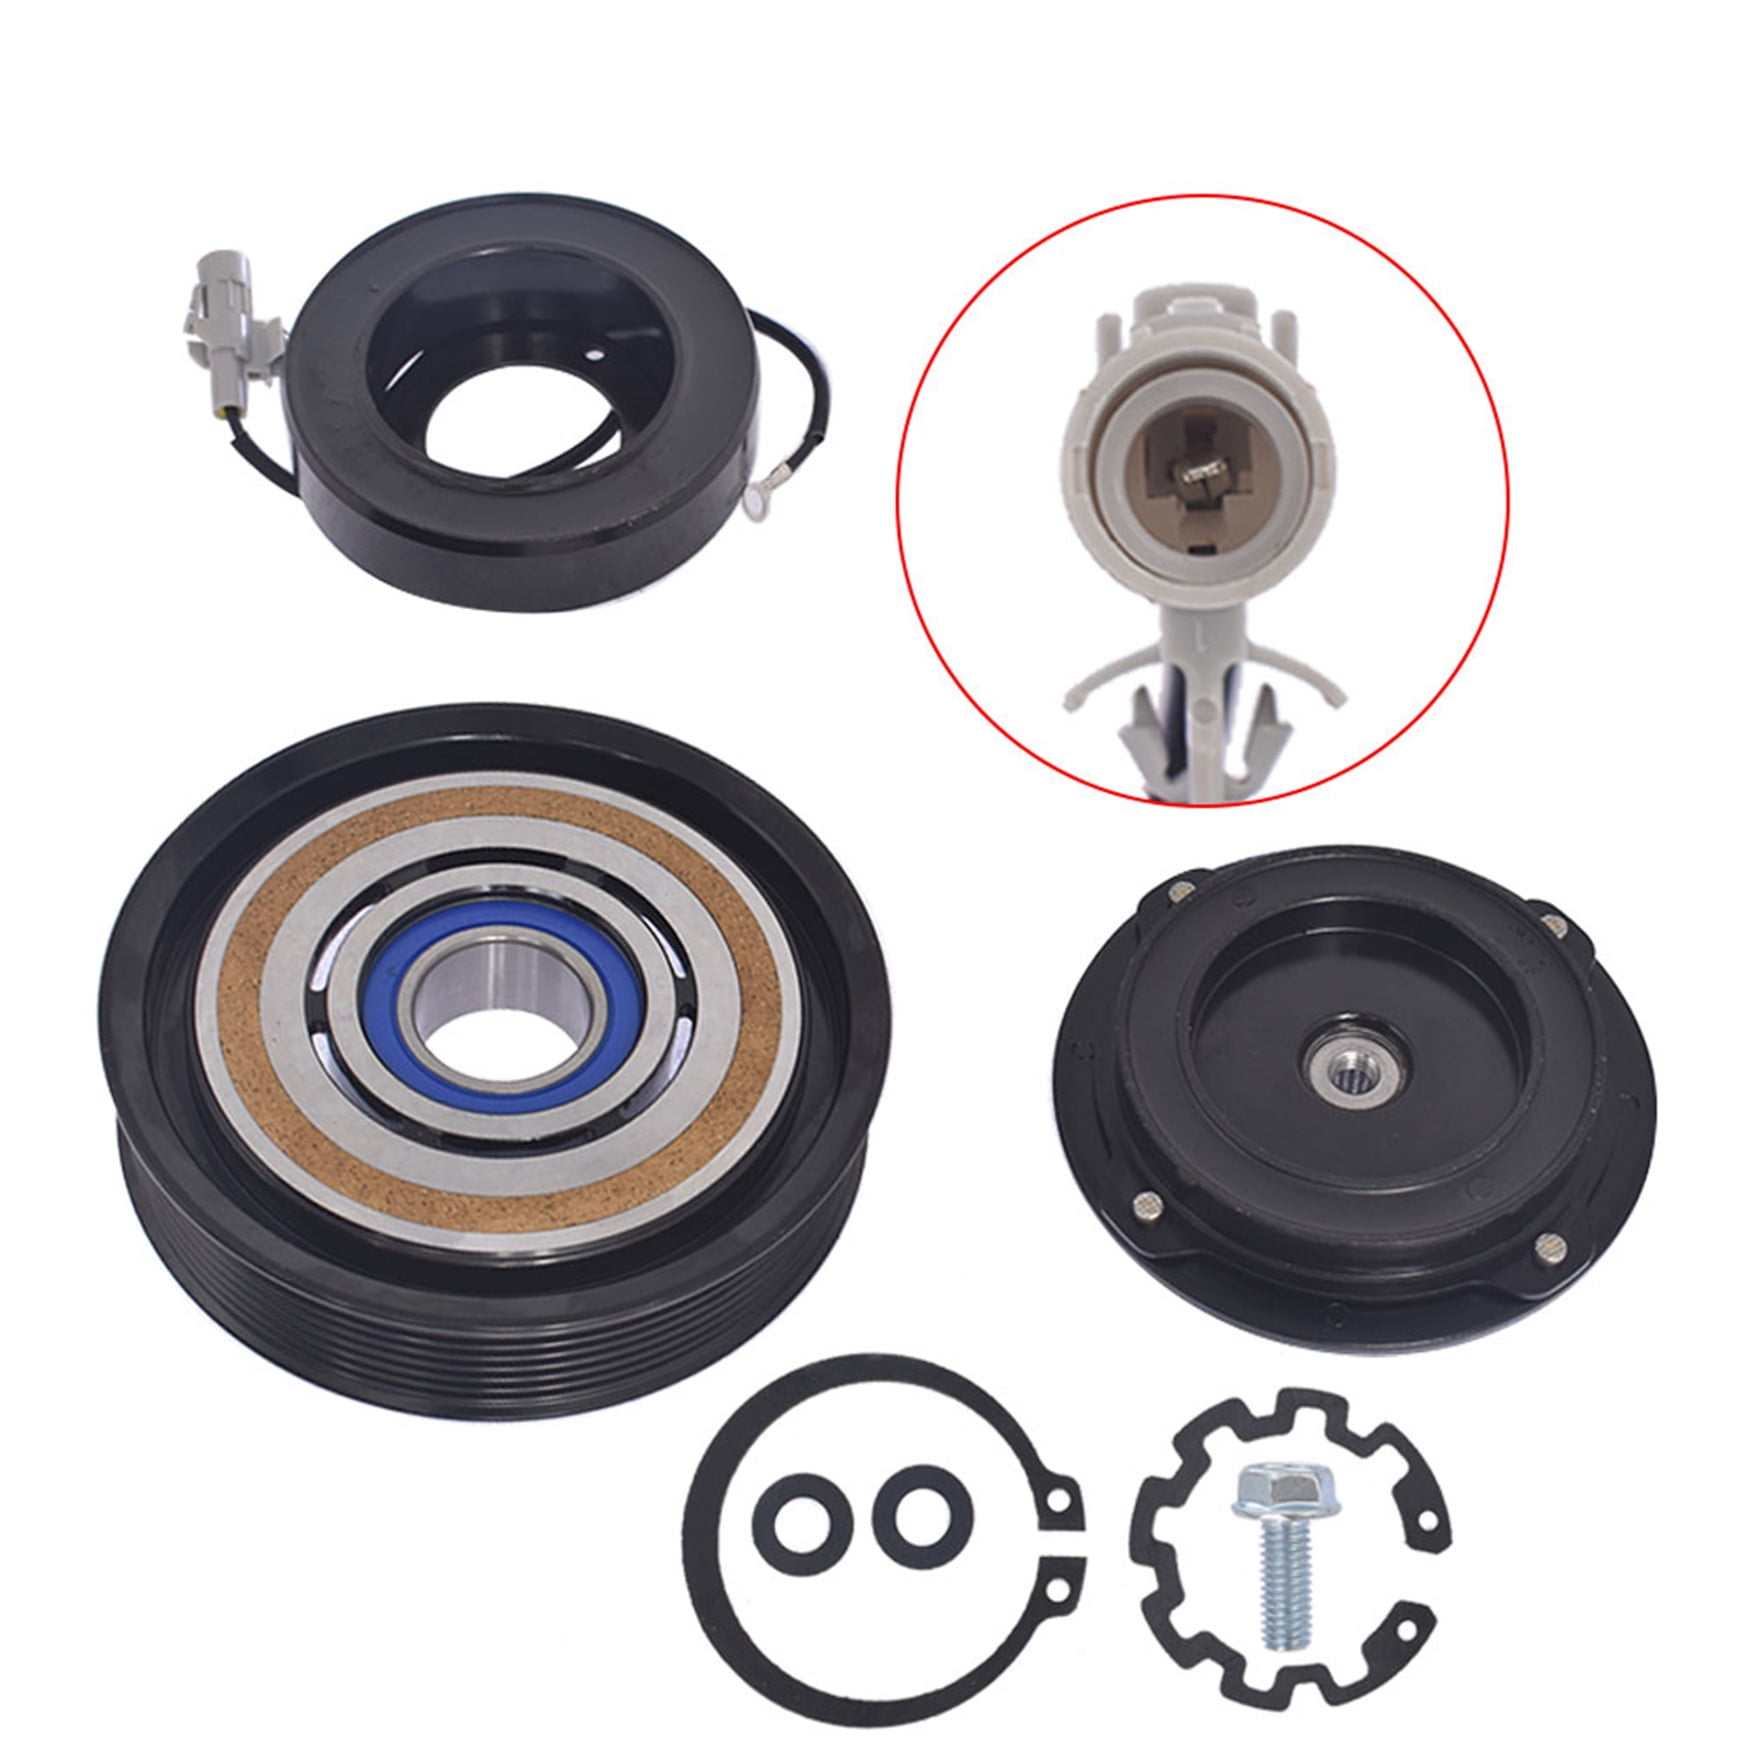 FOR Dodge Ram 1500 8 CYL 5.7L 10S17E 2003 2004 2005 2006 2007 2008 AC Compressor Clutch Kit PULLEY, BEARING, COIL, PLATE 